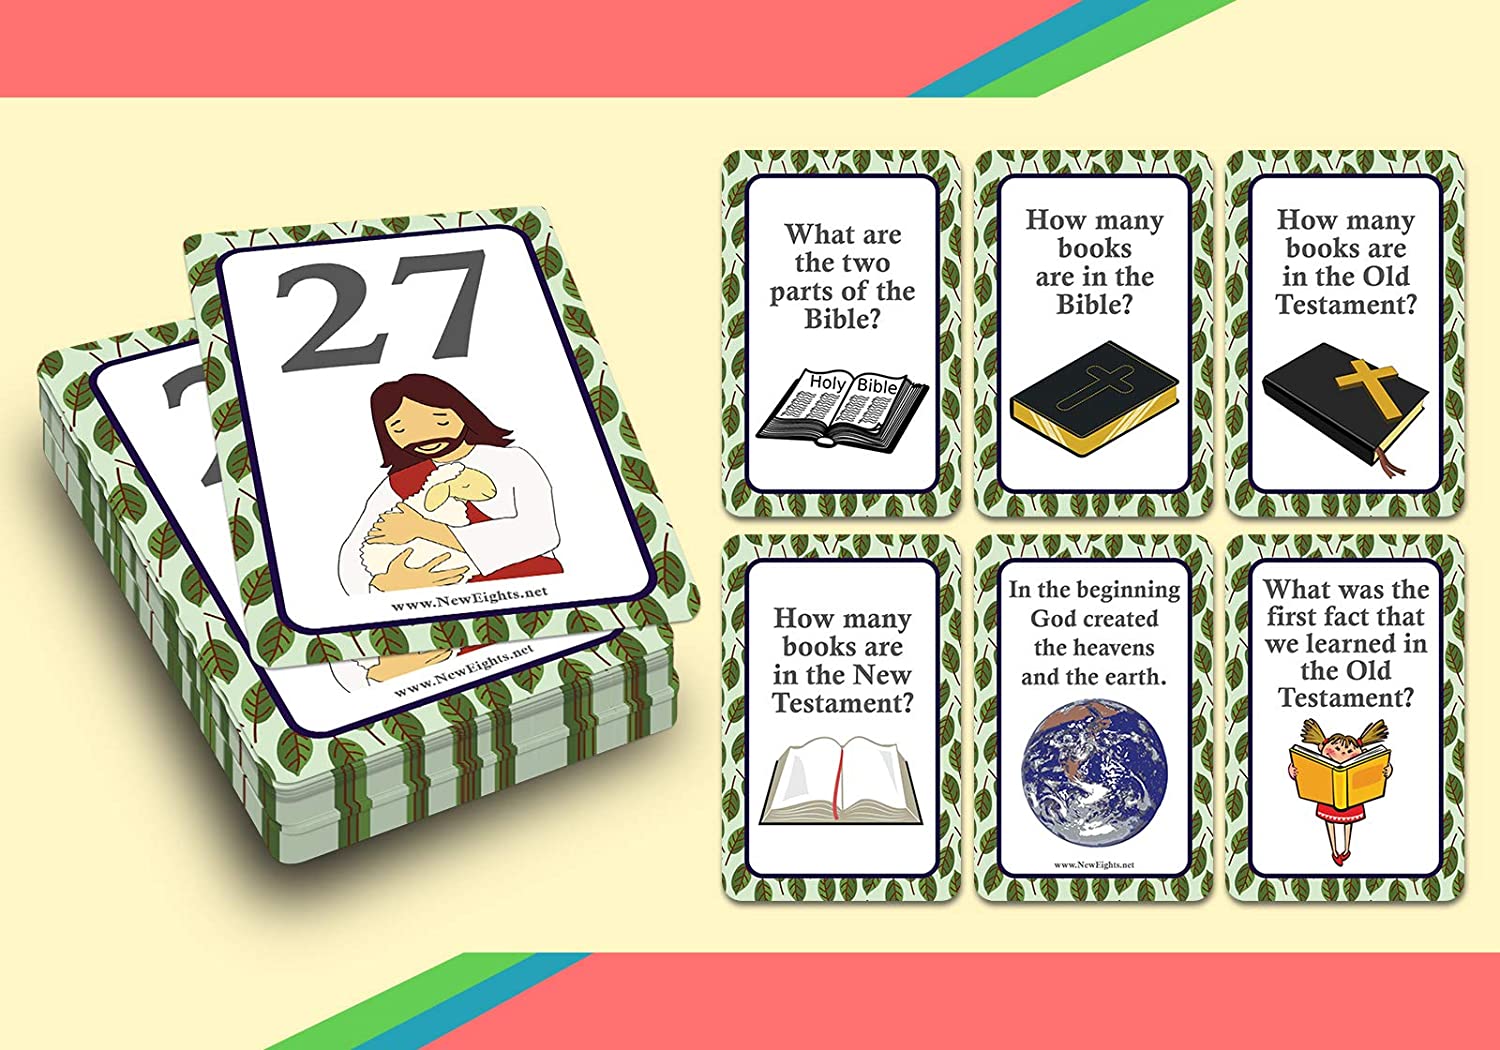 NewEights Bible Facts Learning Flashcards for Children (4-Deck) - Educational Homeschooling Teaching Teachers Set for Day Care Classroom Nursery Home - Religious Cards for Boys Girls